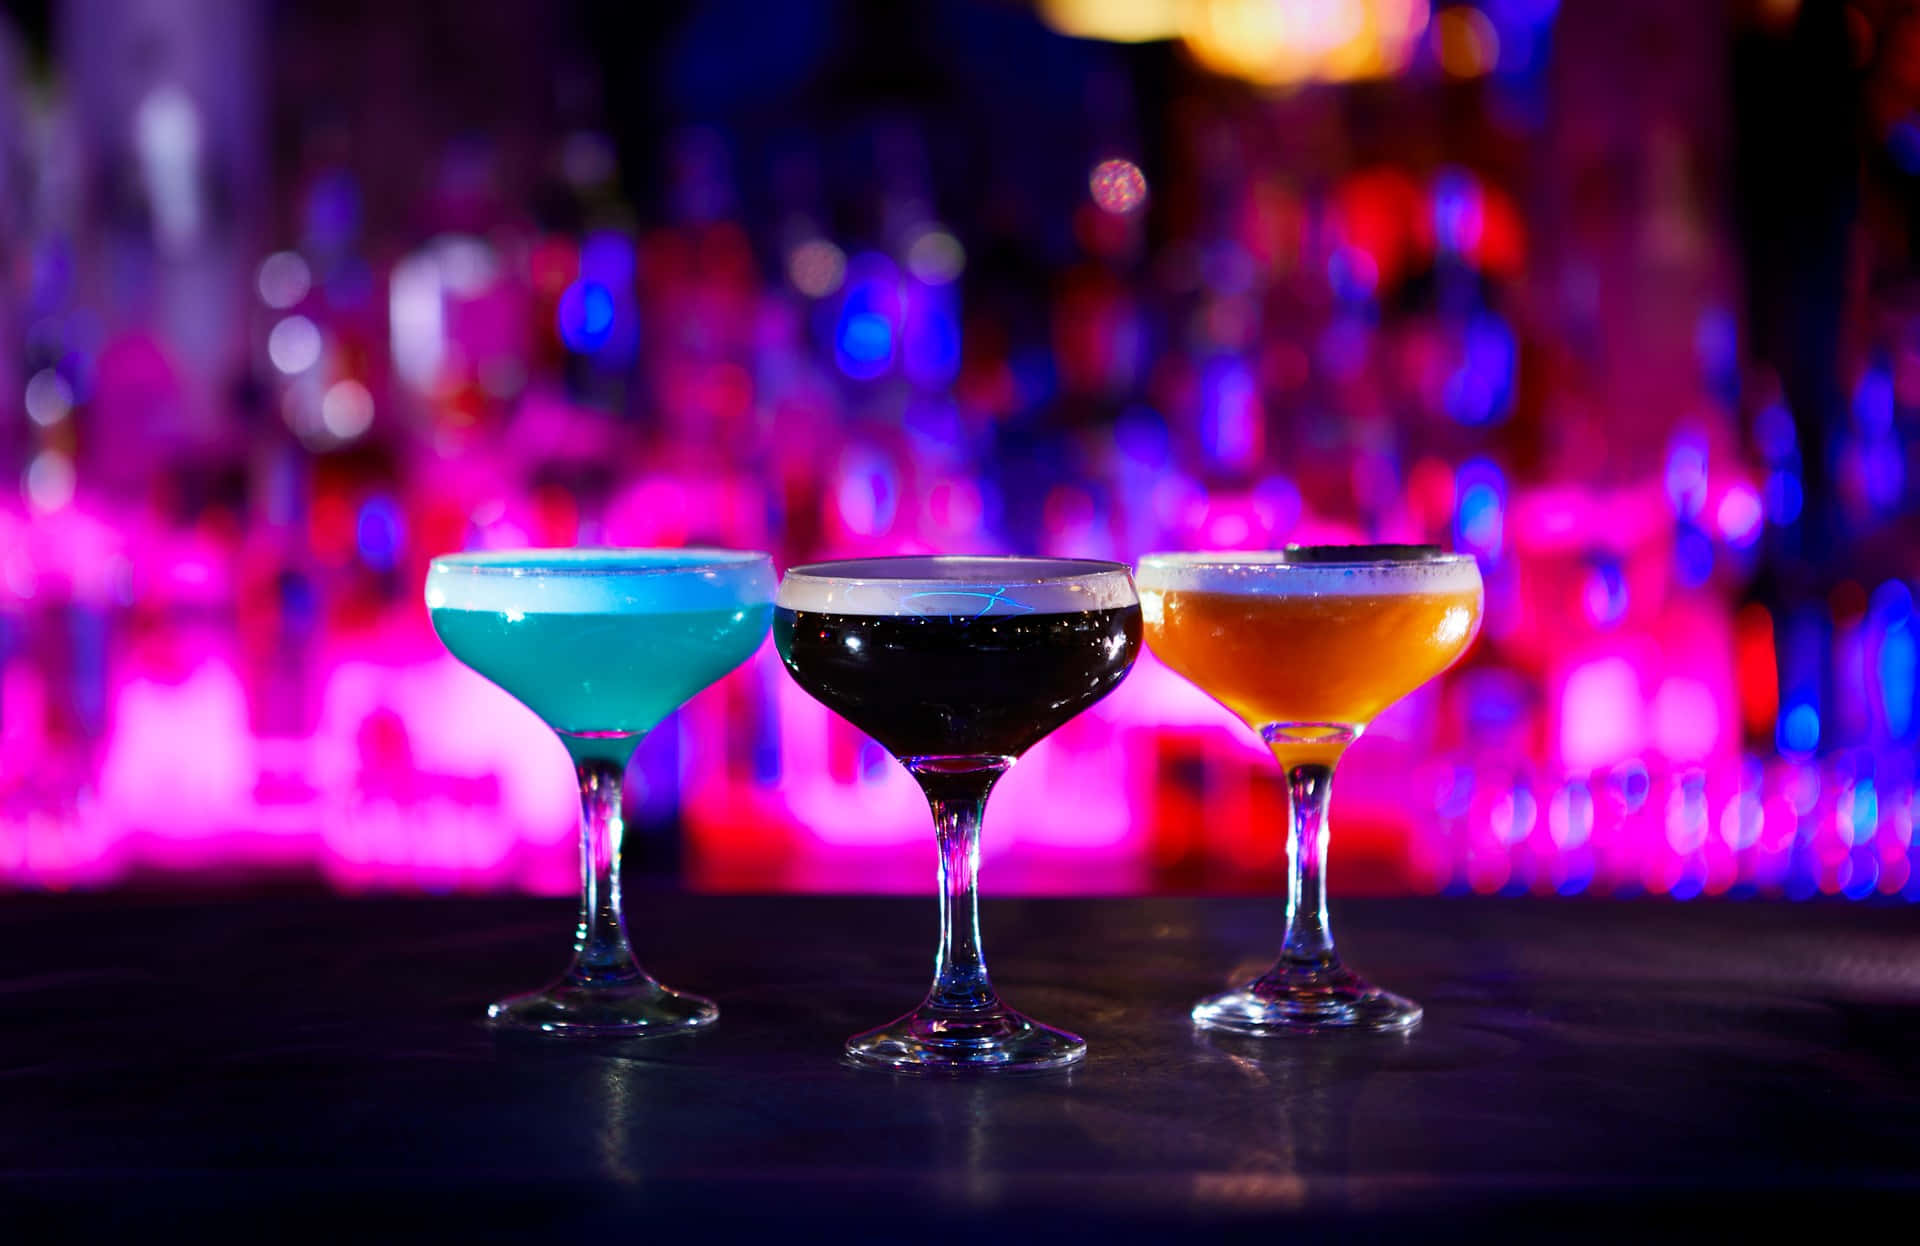 Cocktail Drinks On Purple Bar Counter Wallpaper